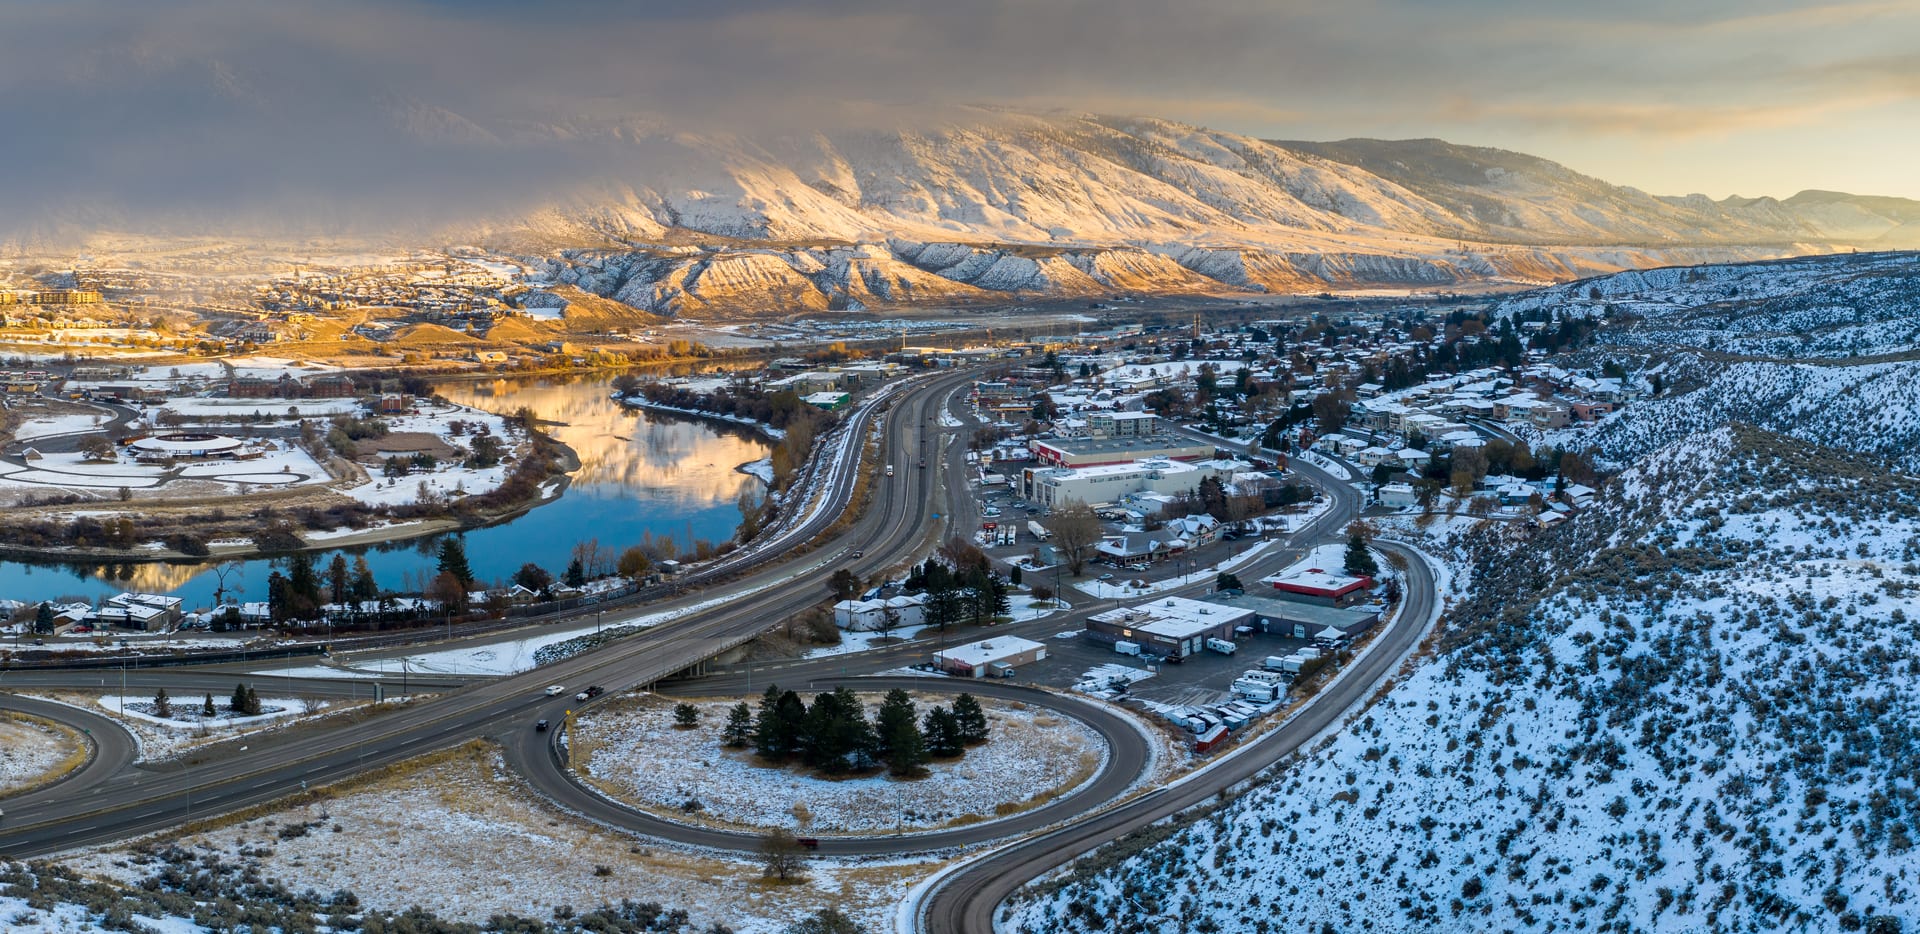 Kamloops City Aerial winding and round road with cloud covering mountain